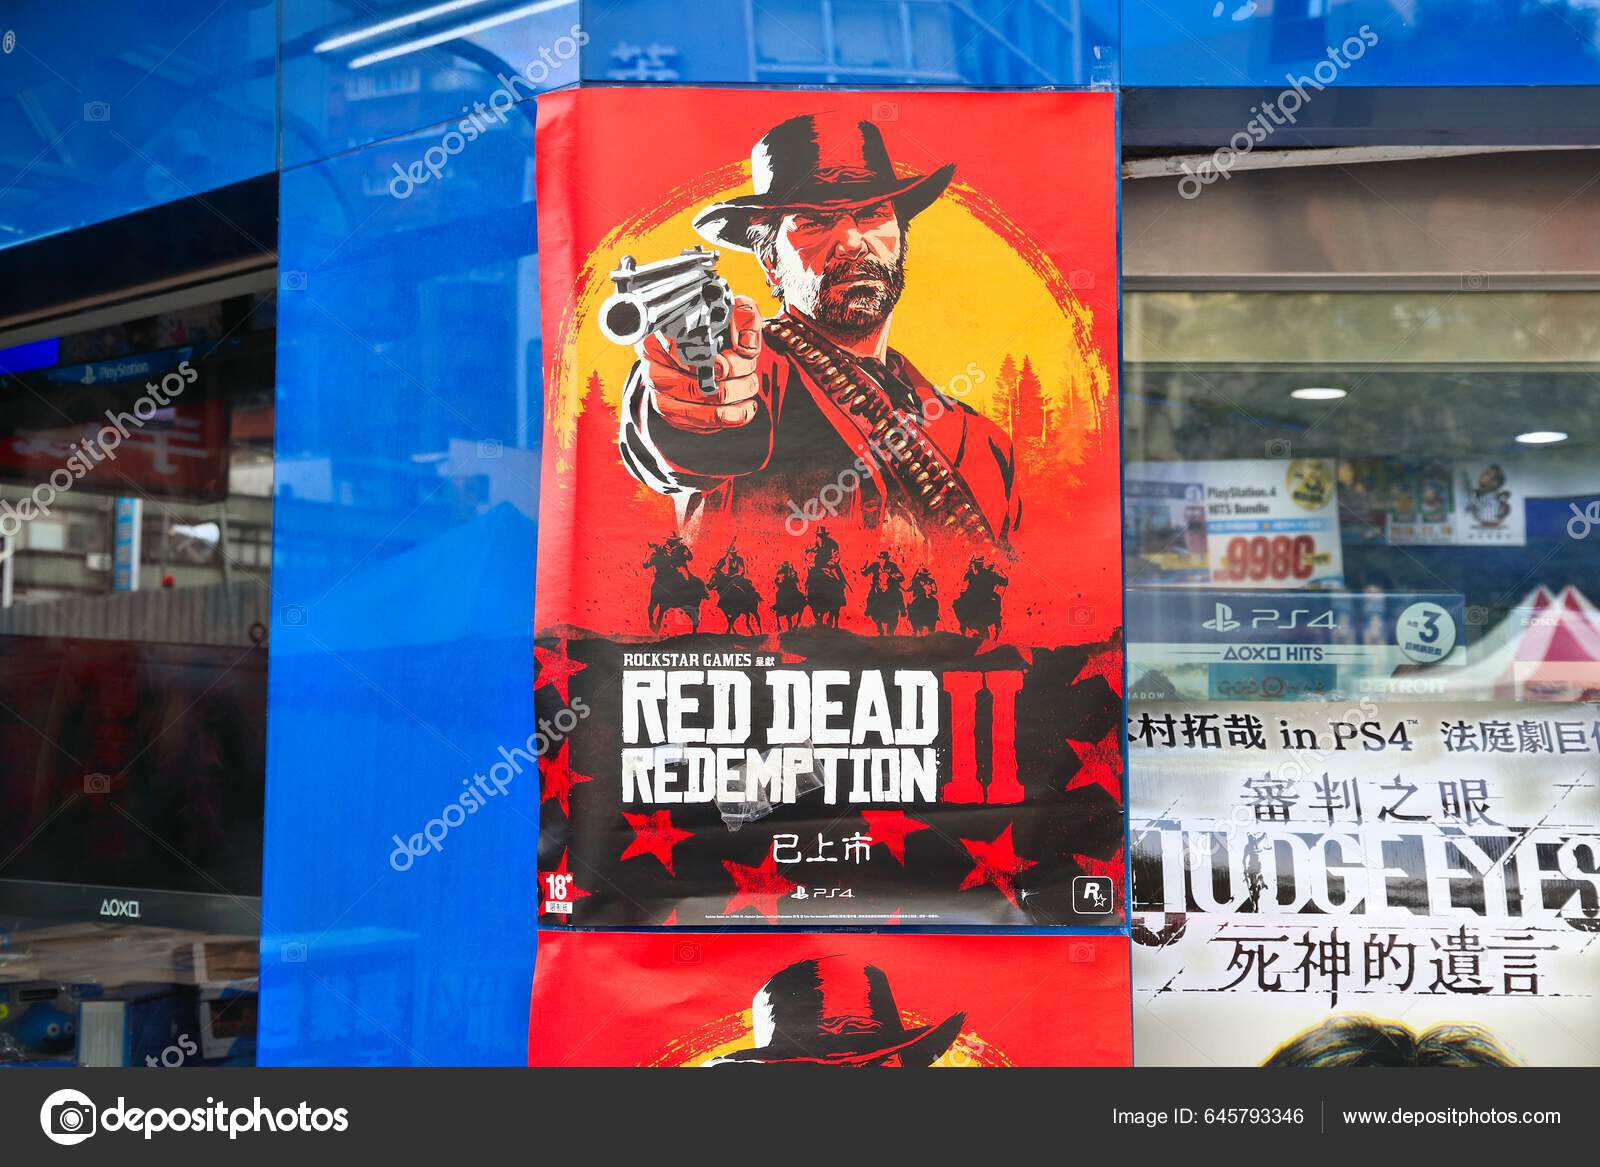  Red Dead Redemption - PlayStation 4 : Video Games